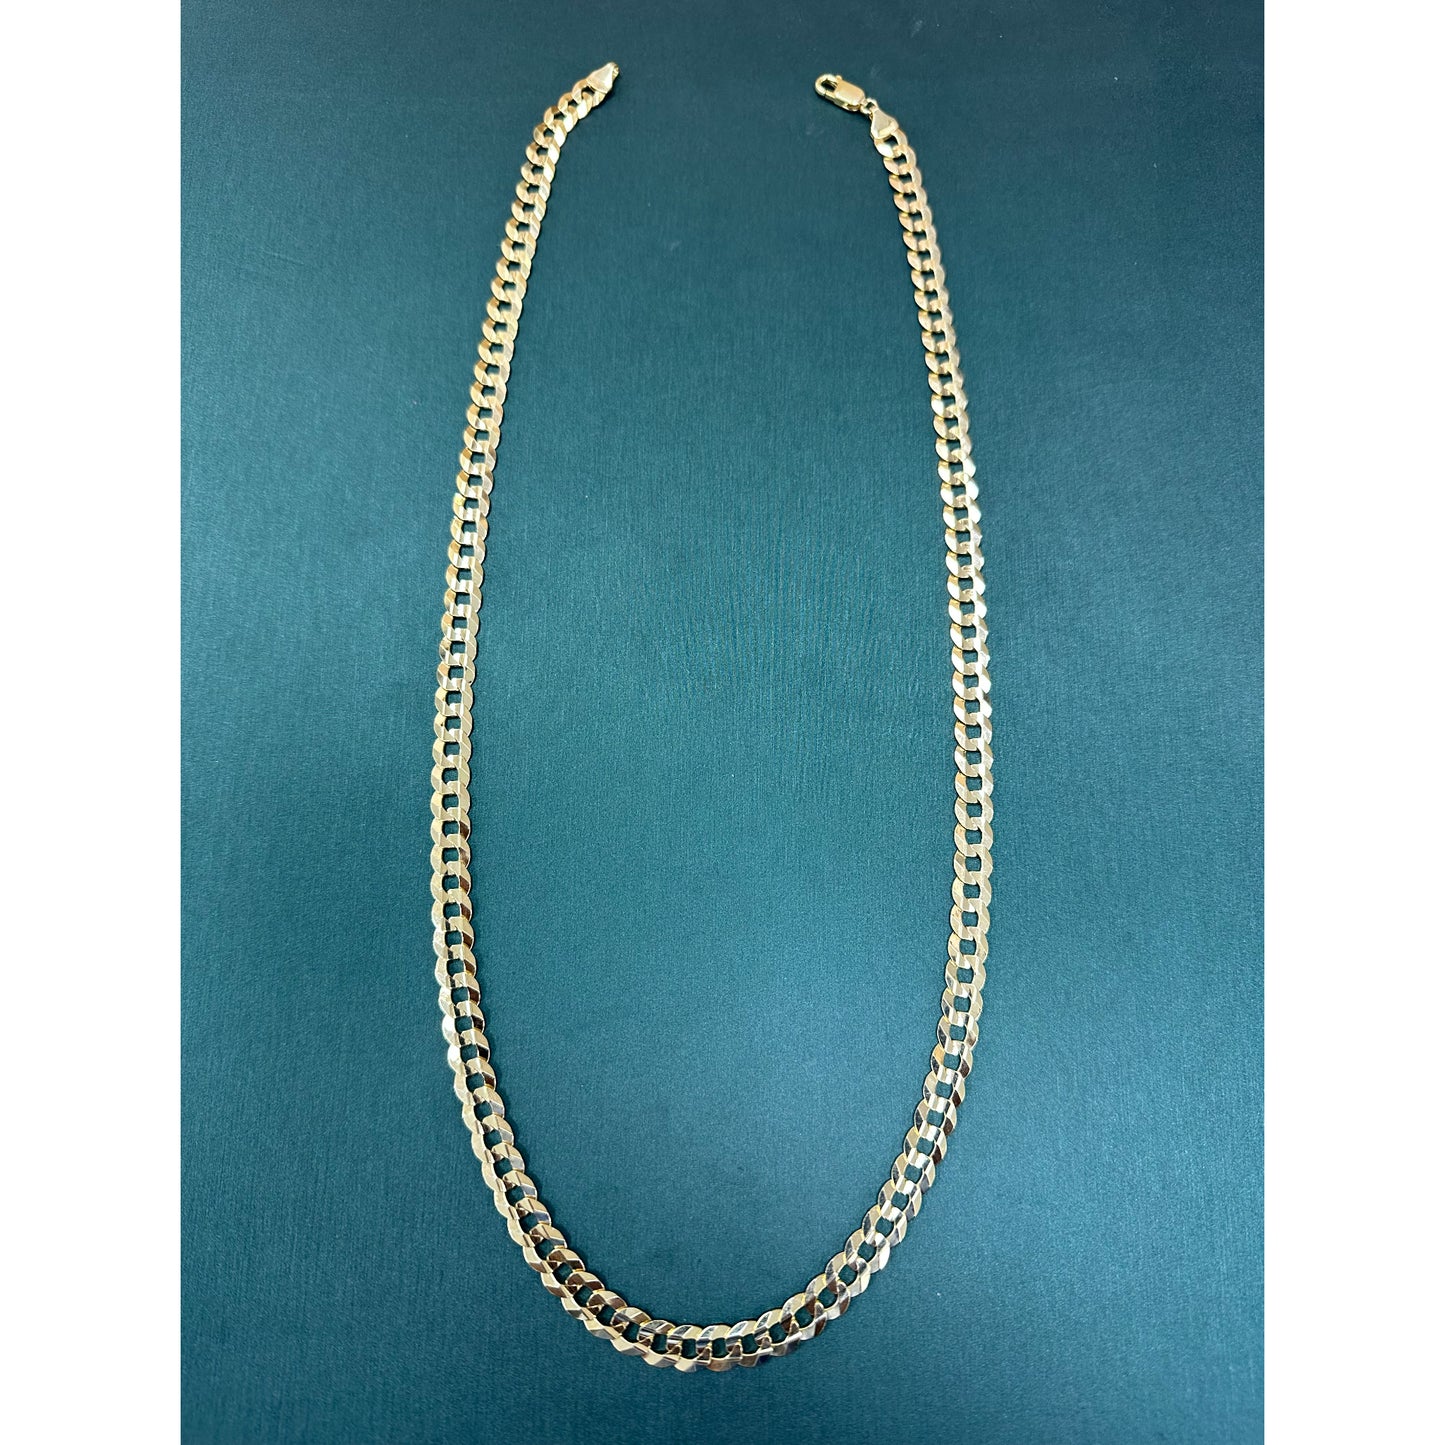 Curb Link Chain 7.5mm 24 inches 14k